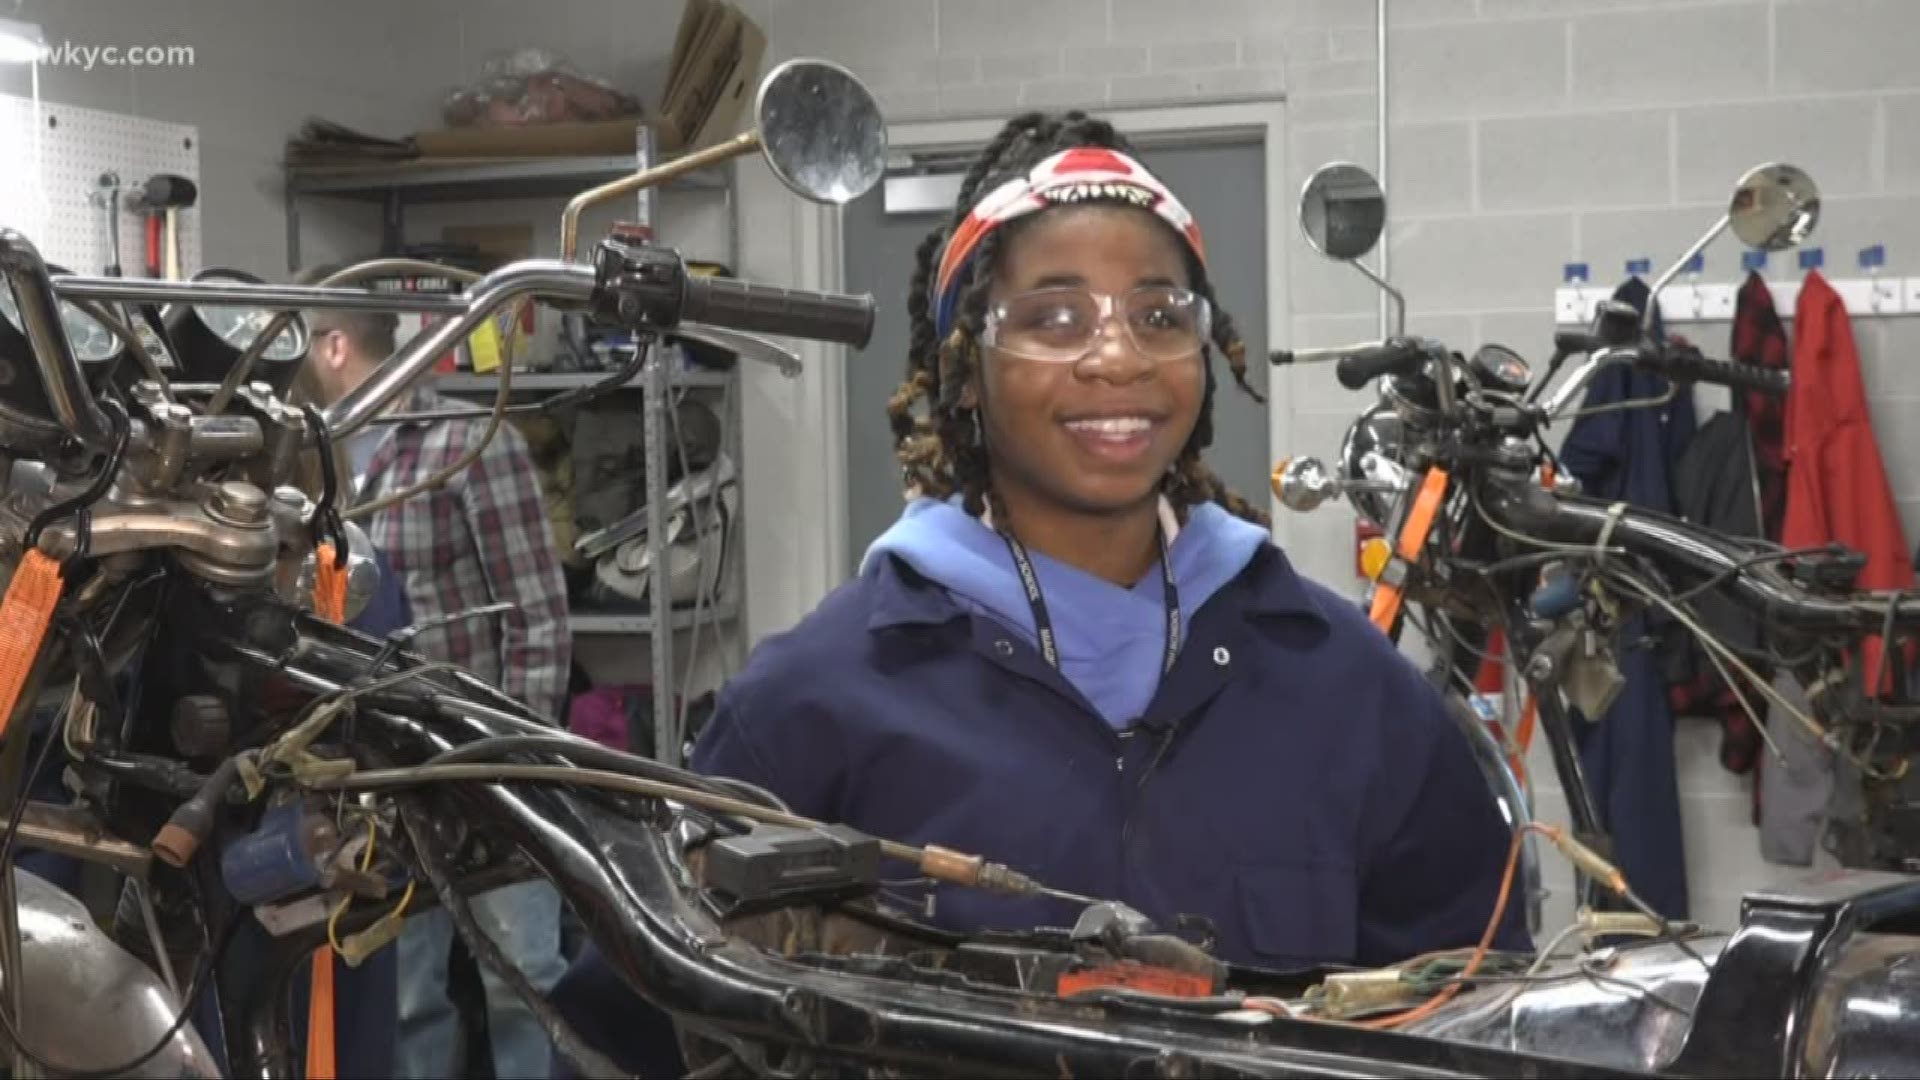 The young women at Magnificat High School are switching gears. Some students are now building motorycles in a special shop class.